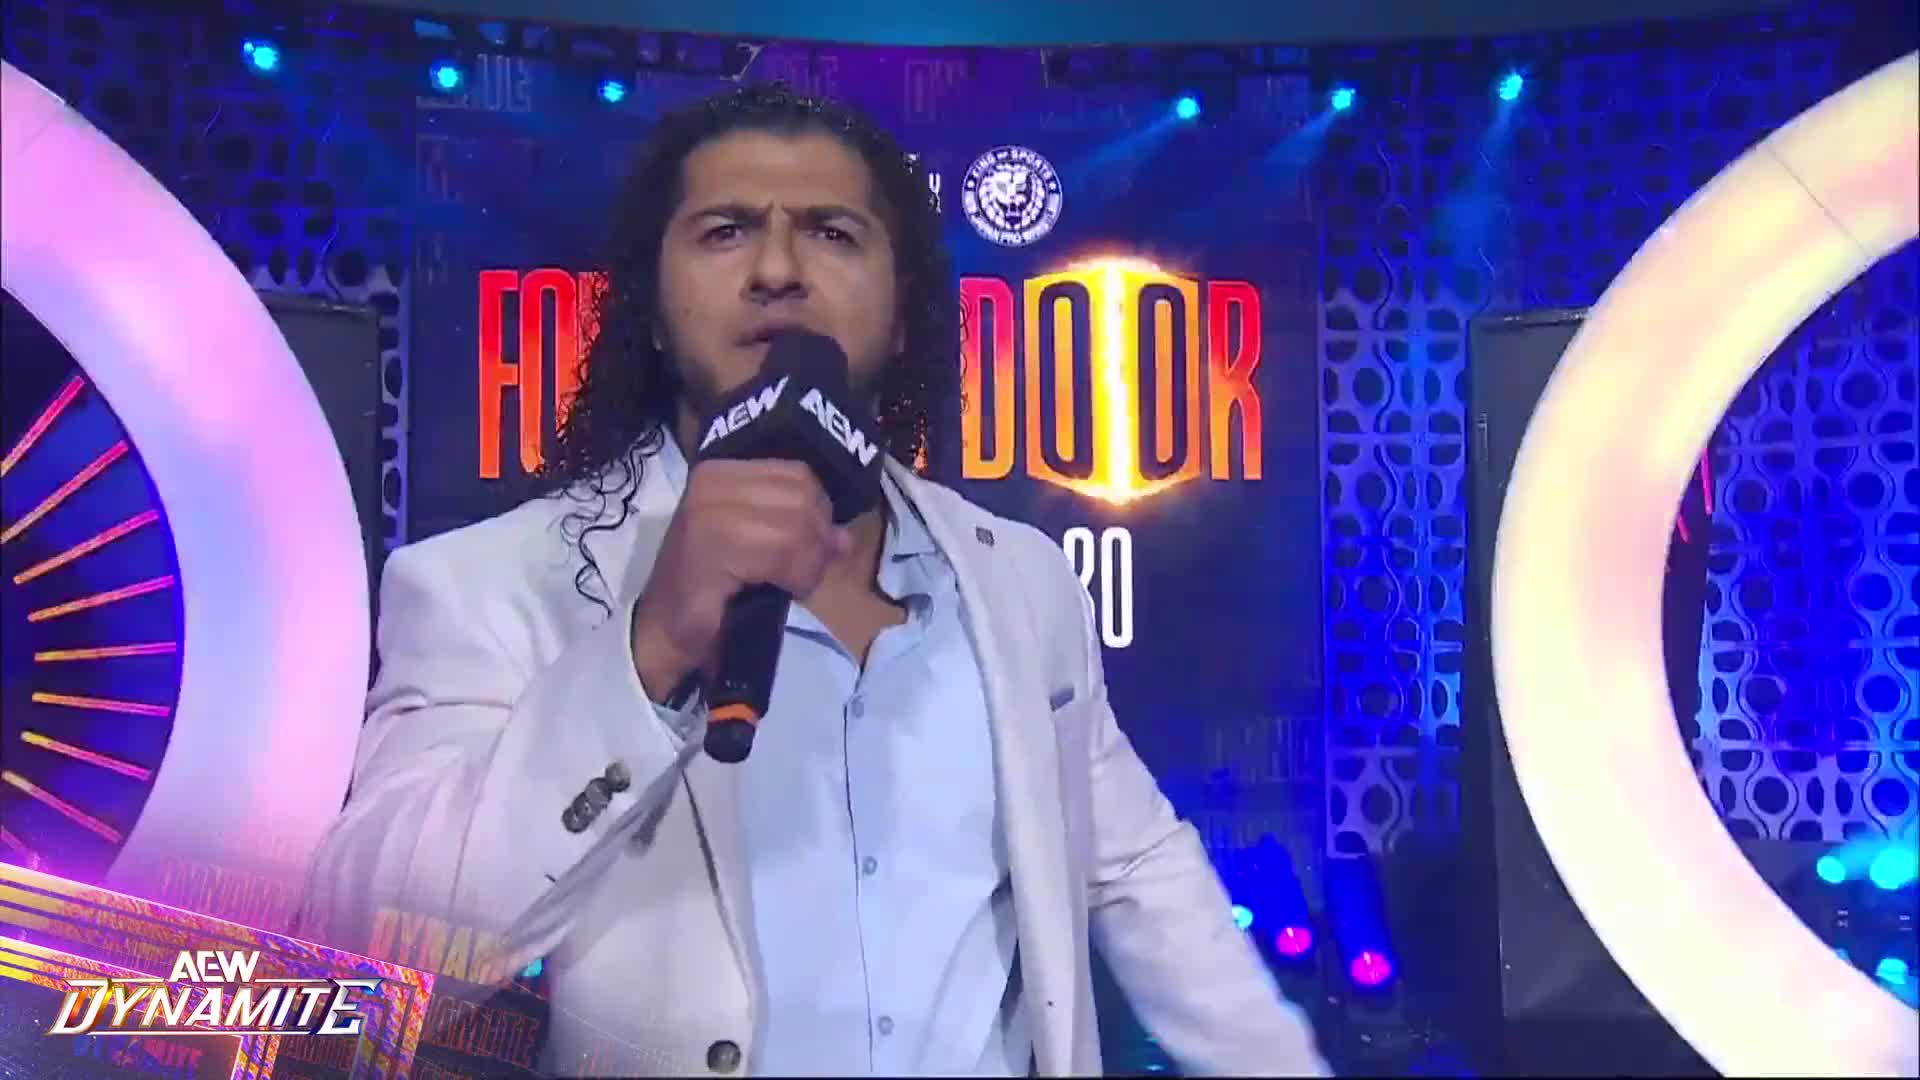 As Proven By The Massive Ratings, Santos Escobar vs Triple H Will Restore The Feeling And Put The Best Wrestling Company Back On Top